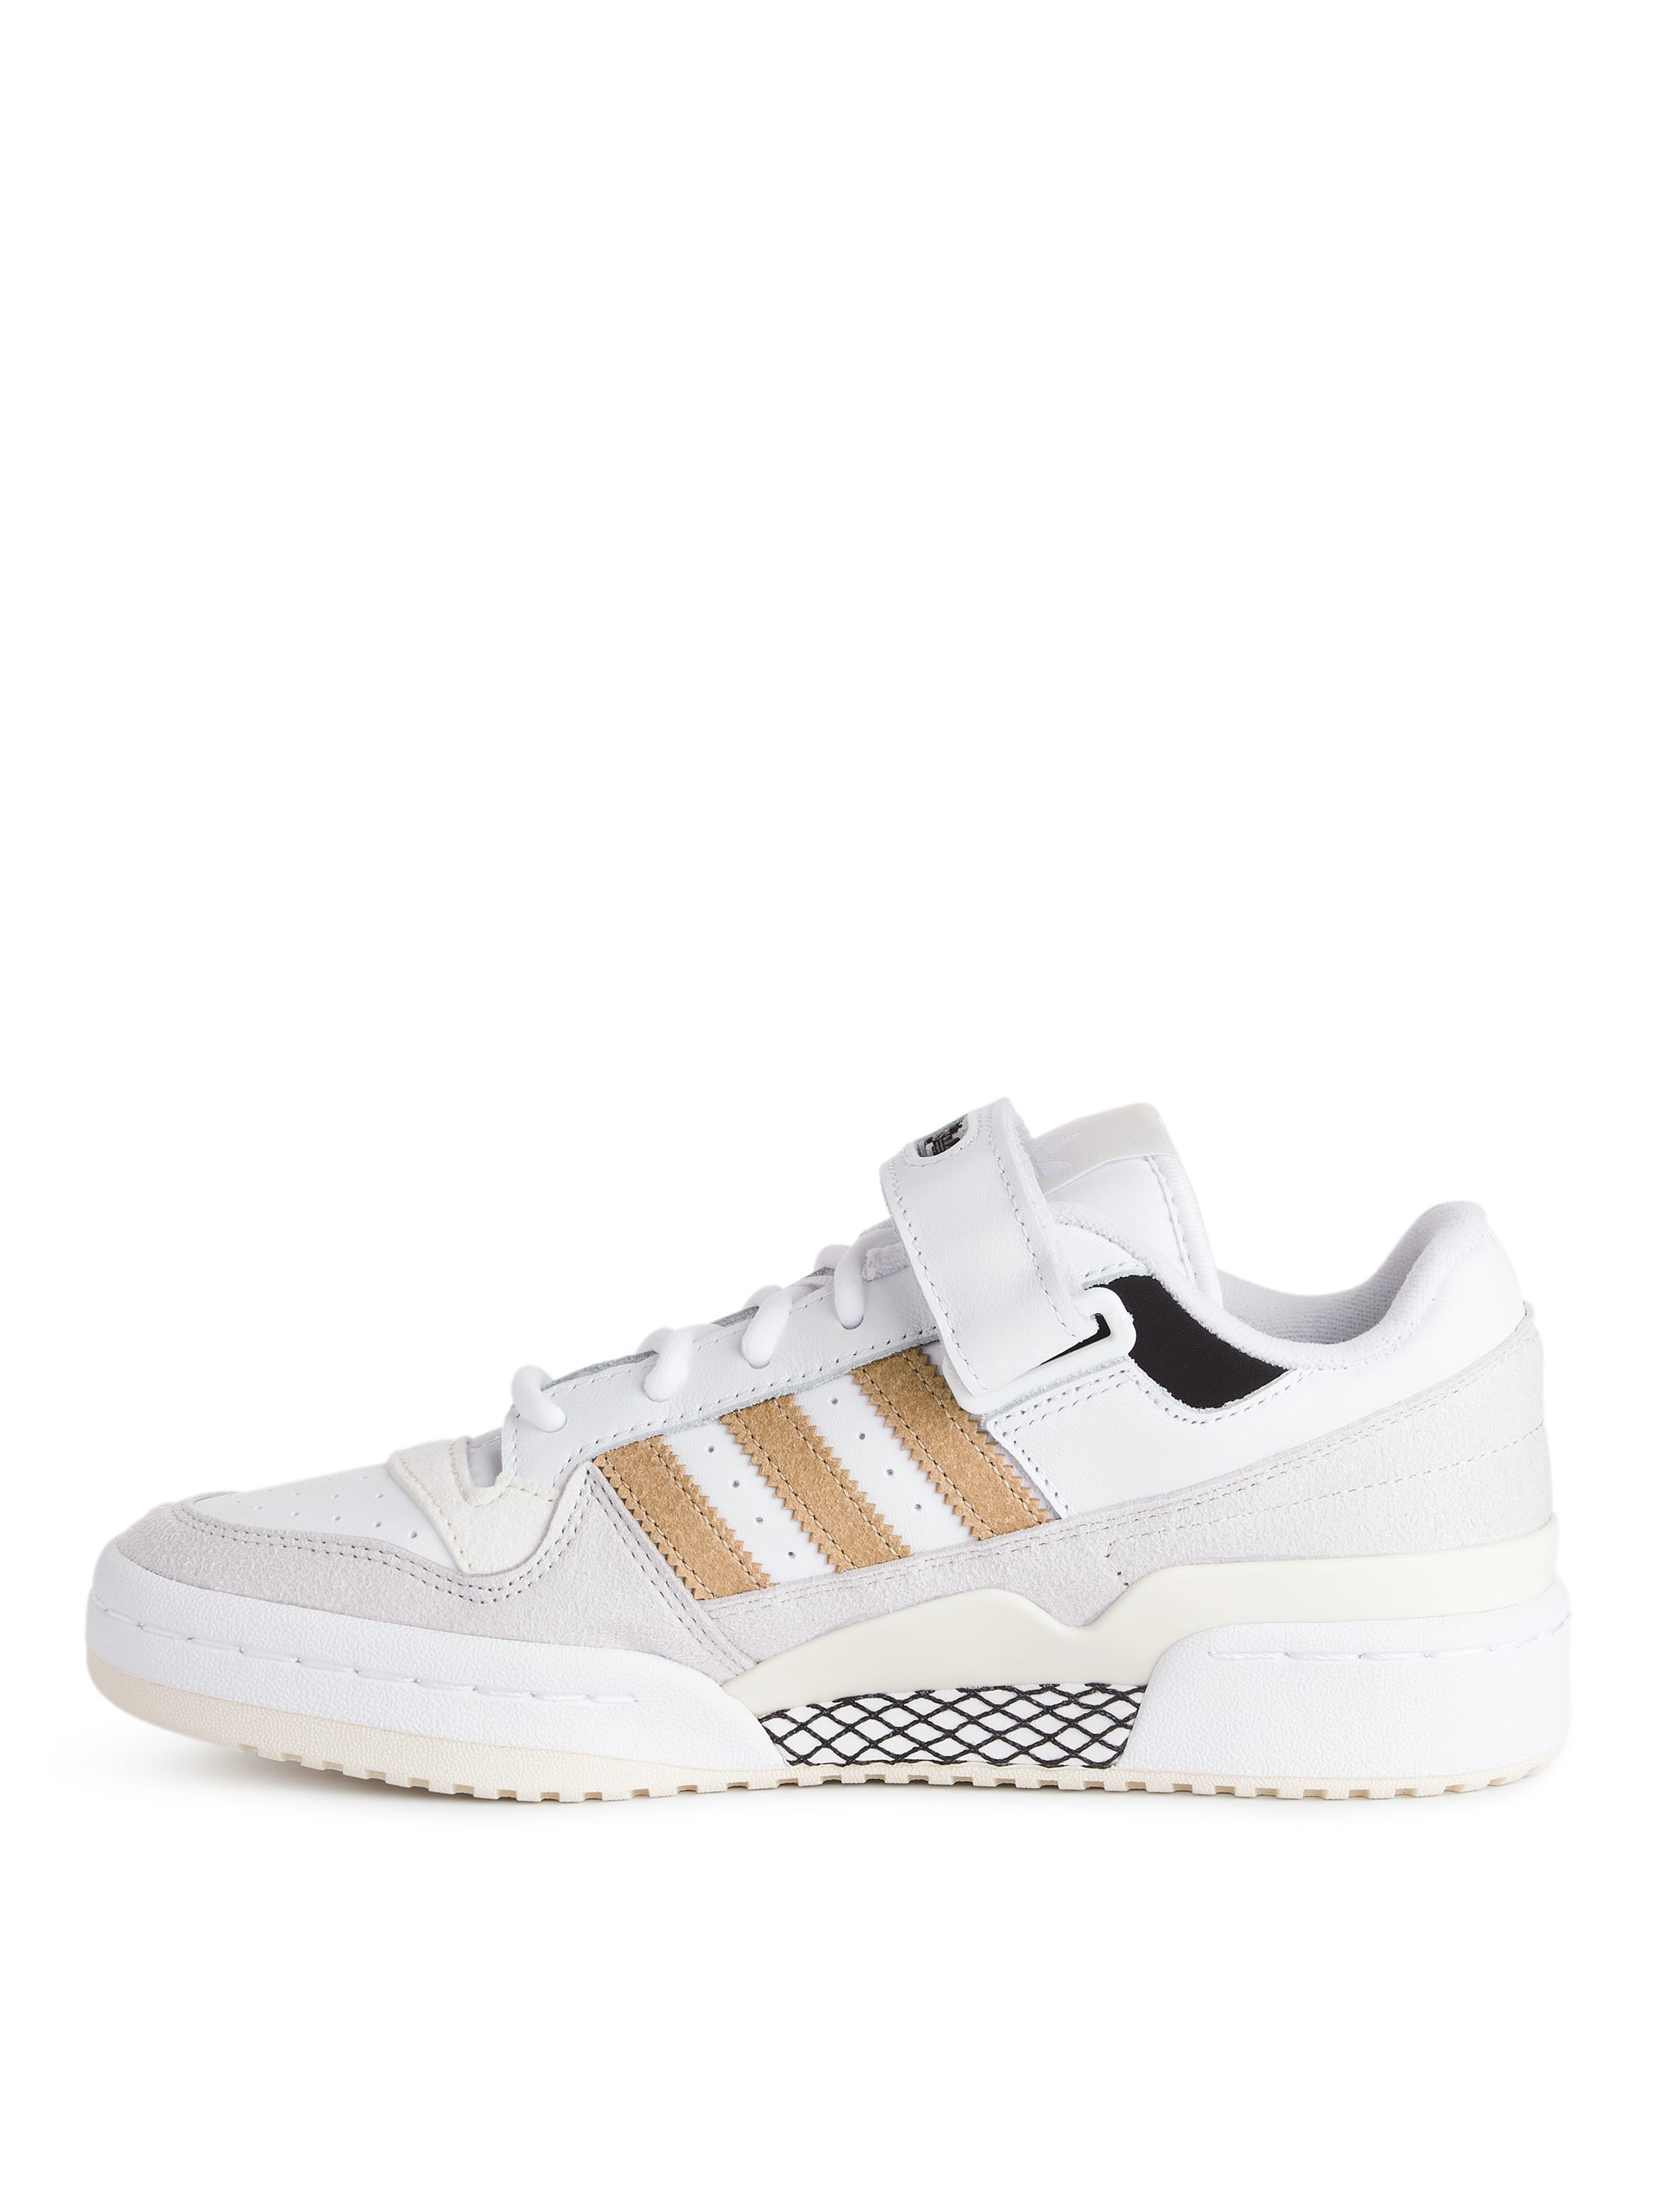 Kan ikke Perfervid hund Adidas Forum Low Trainers White/yellow Multicolour | Afound.com